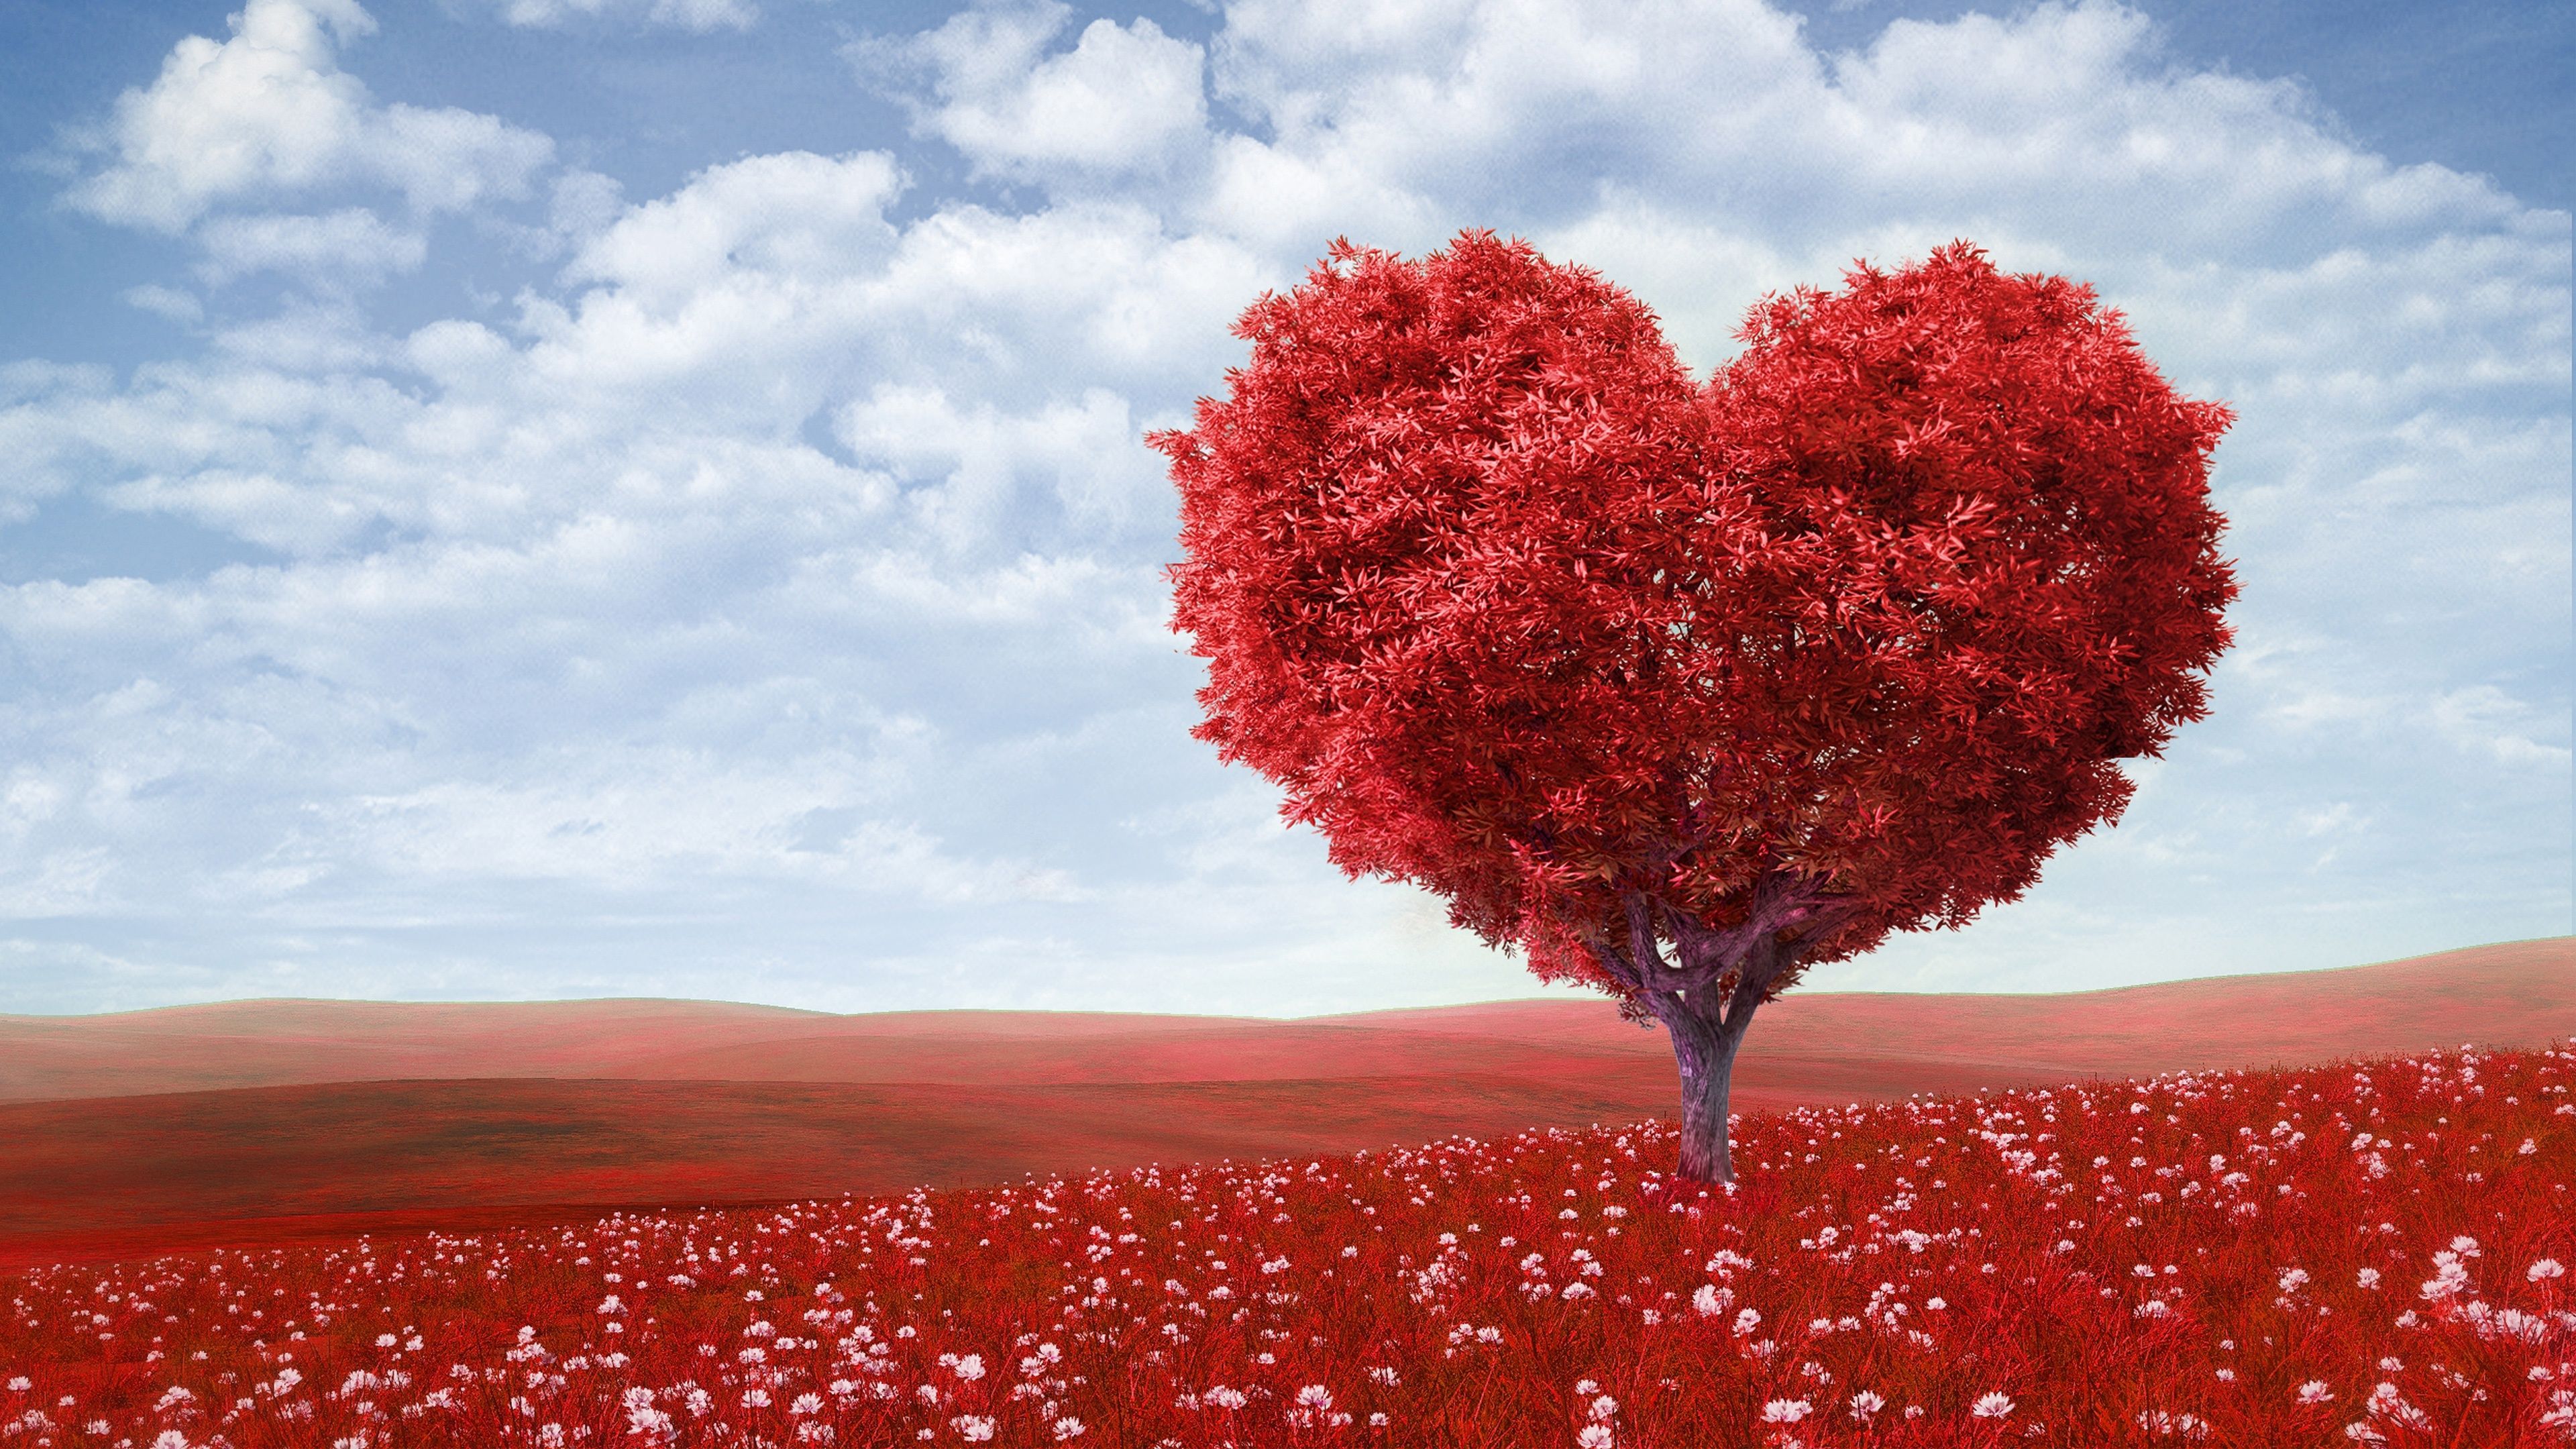 Red Love Heart Tree Wallpaper in jpg format for free download